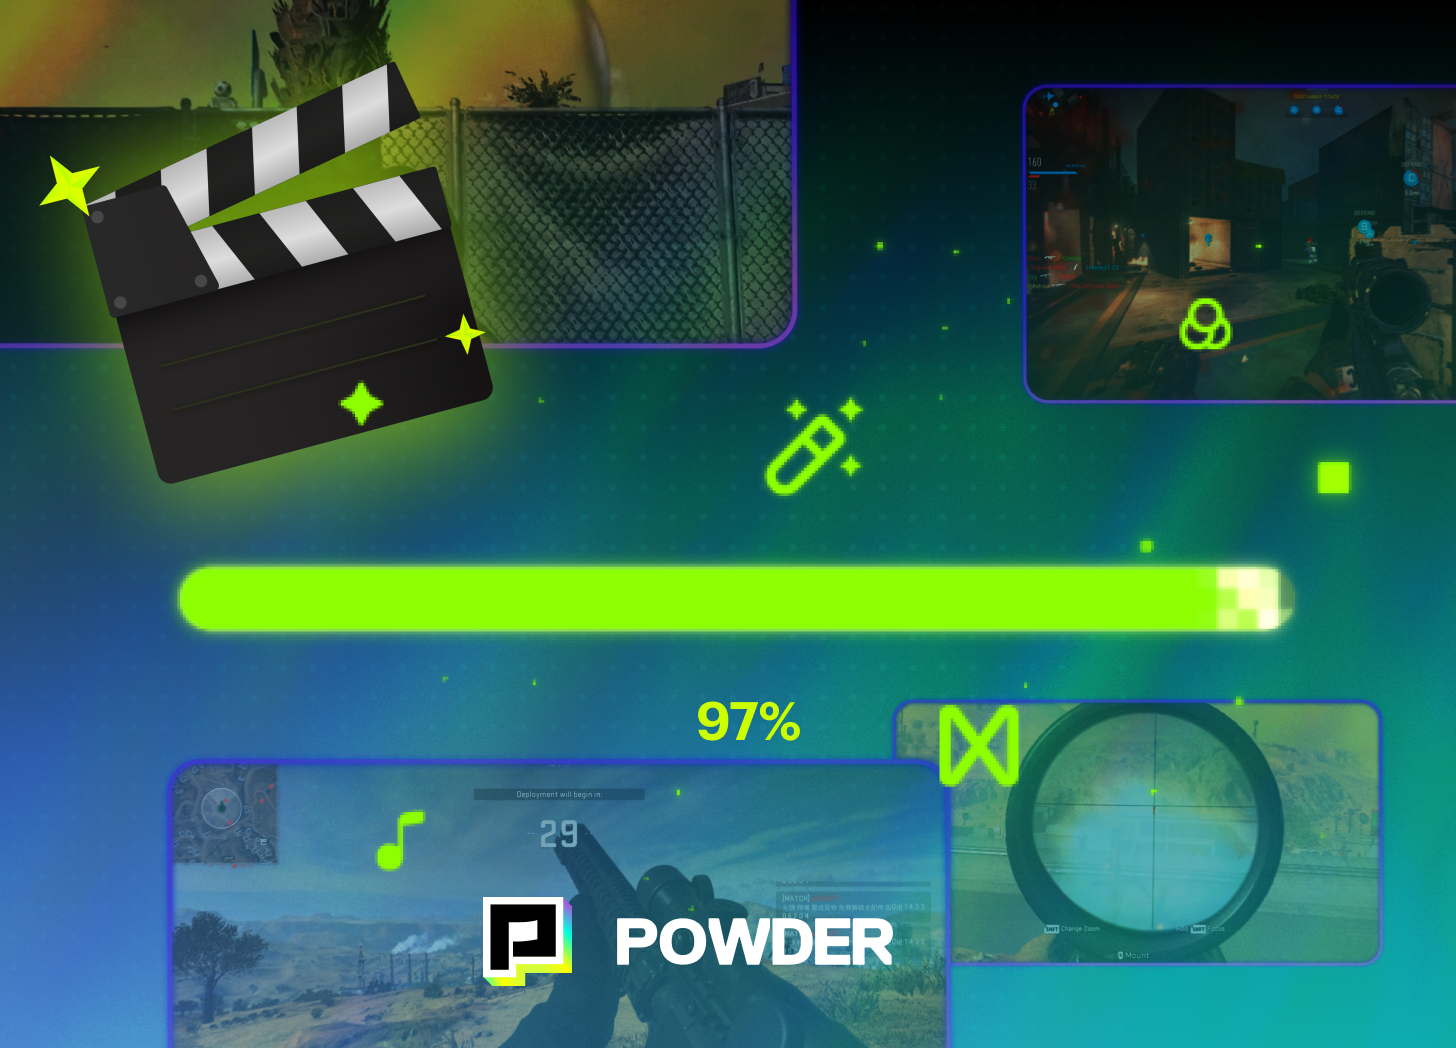 Powder, an AI clipping tool for gaming, can detect when a creator